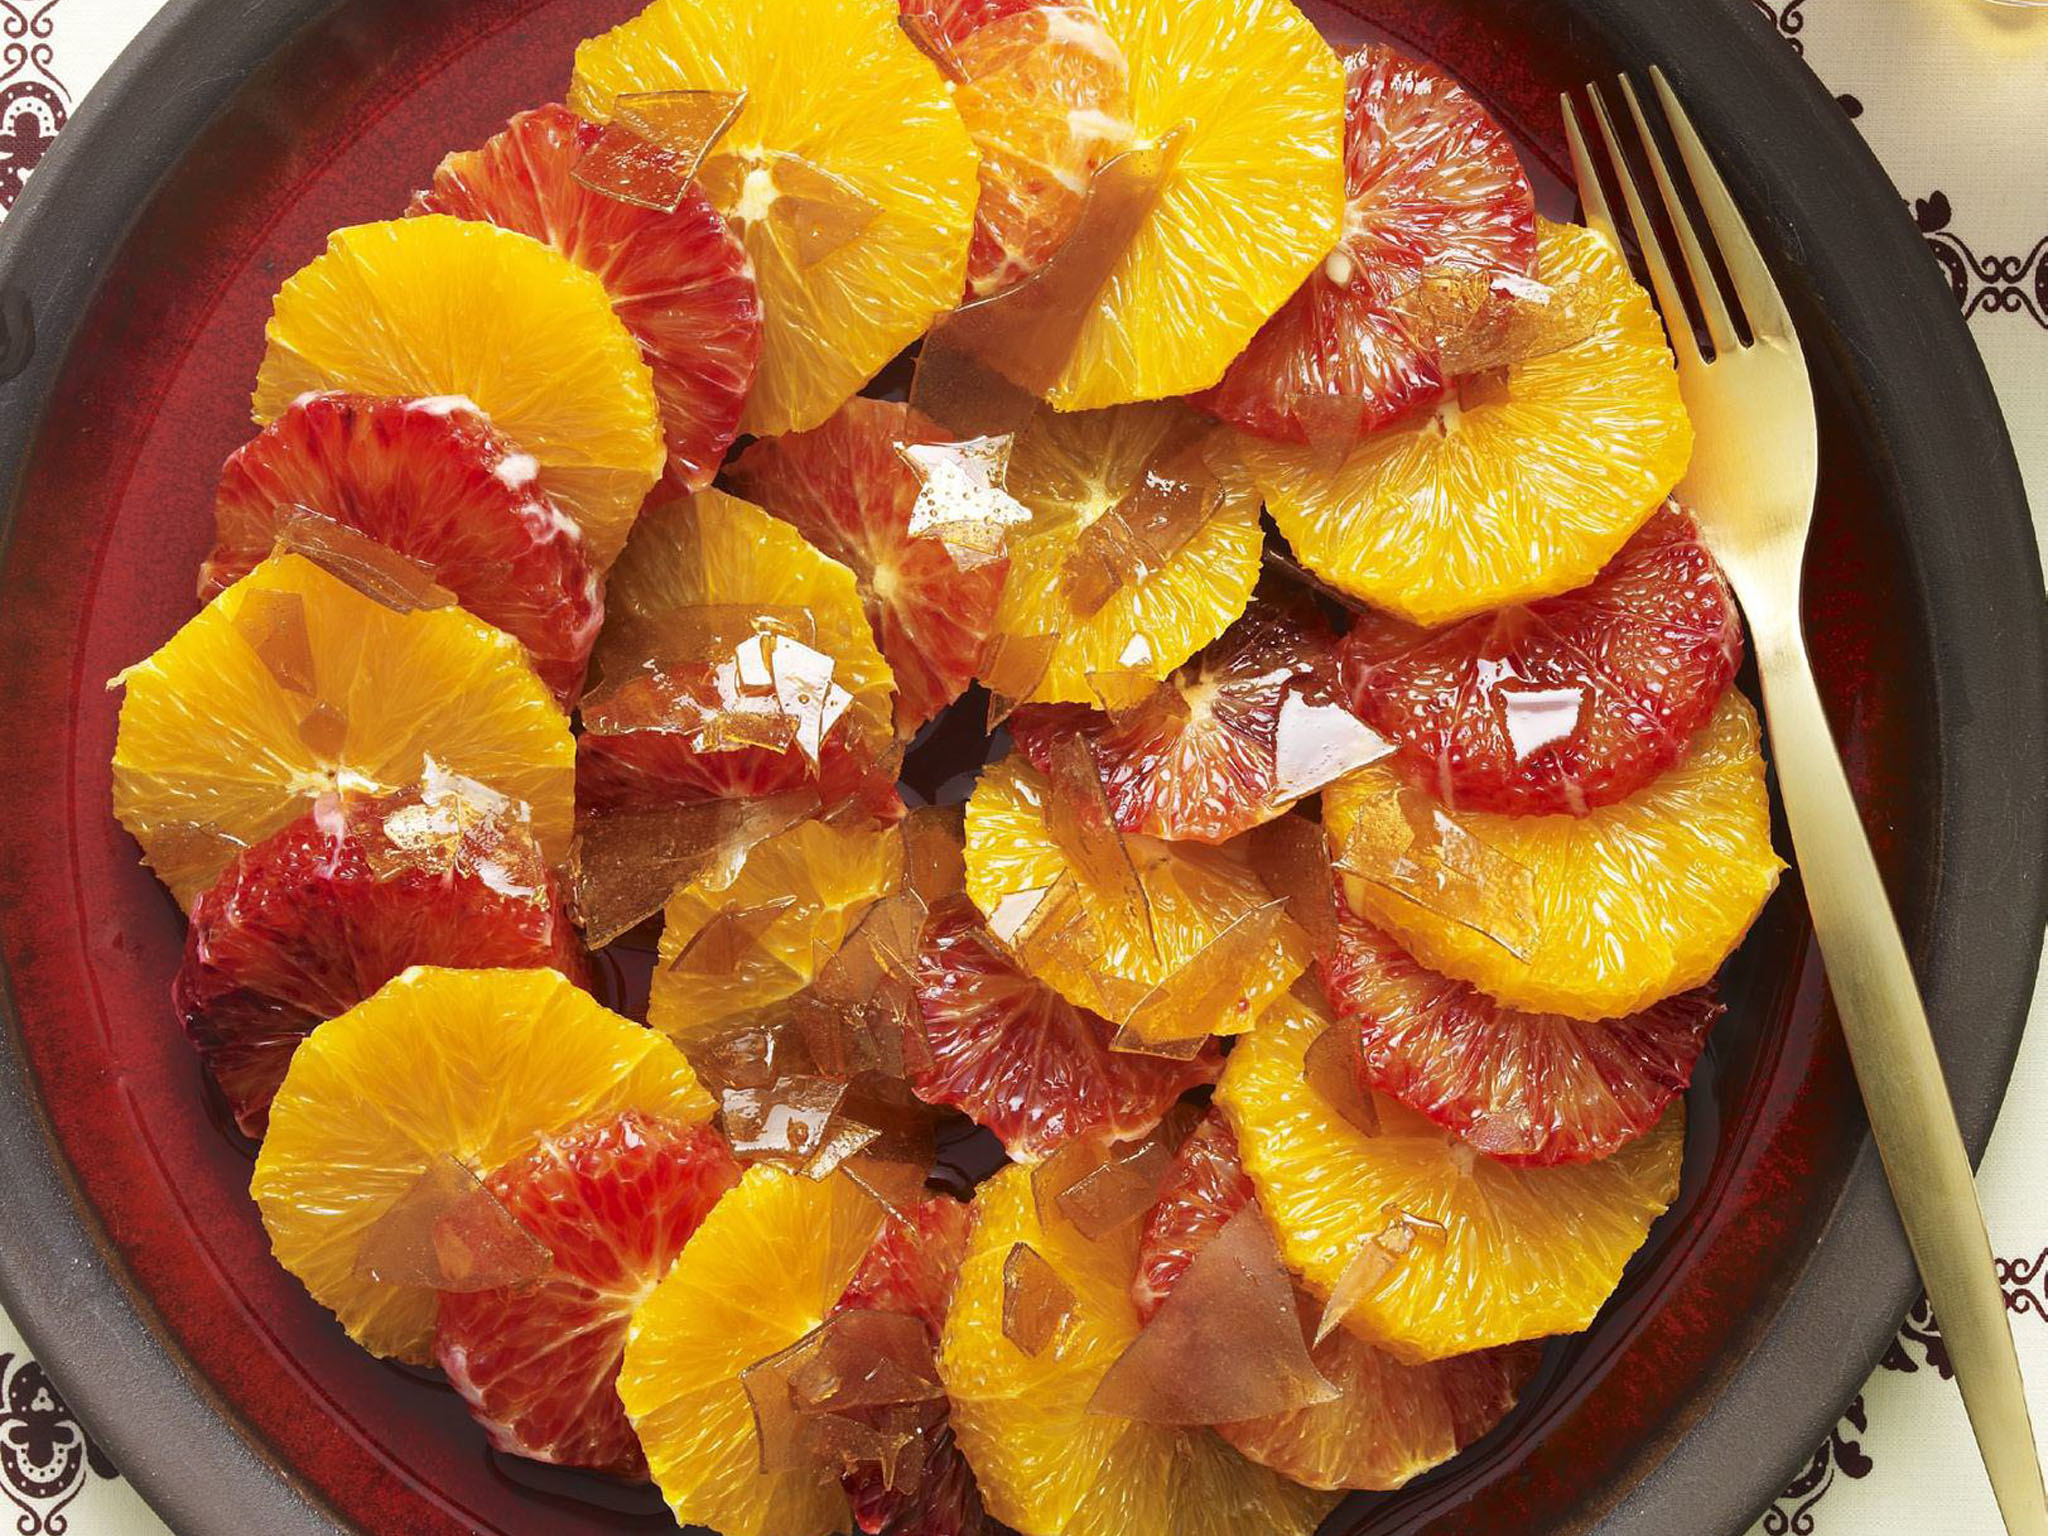 Spiced oranges with brown sugar toffee